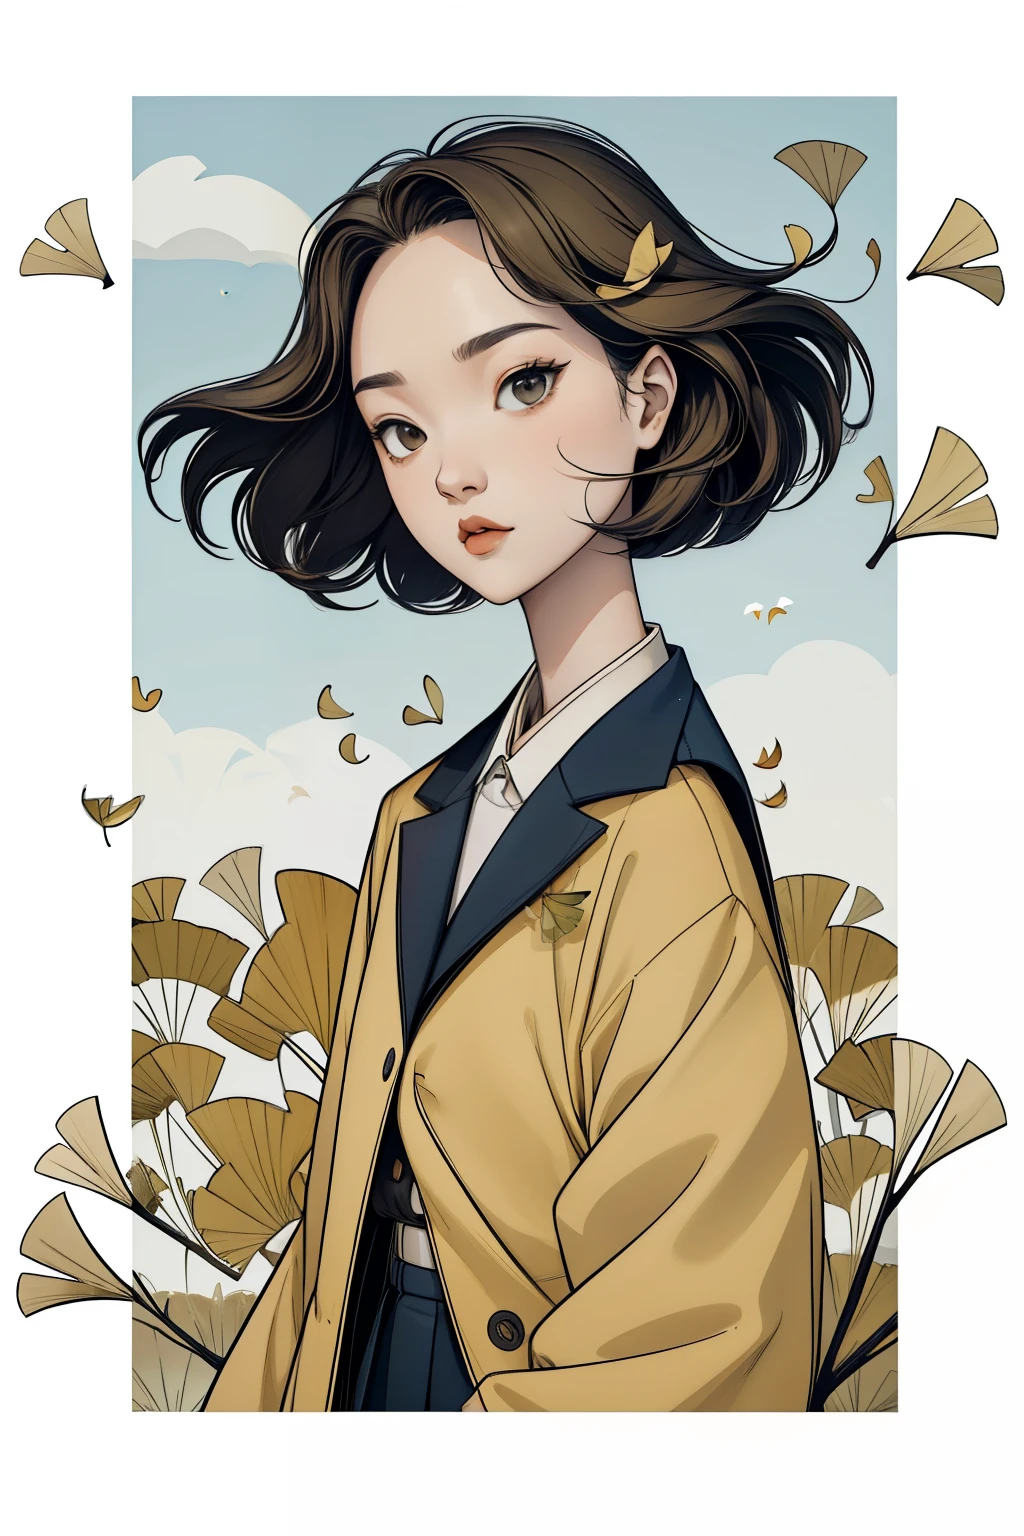 Girl under the ginkgo tree in autumn，portrait，Ginkgo leaves falling in strong wind，Ginkgo leaves flying all over the sky